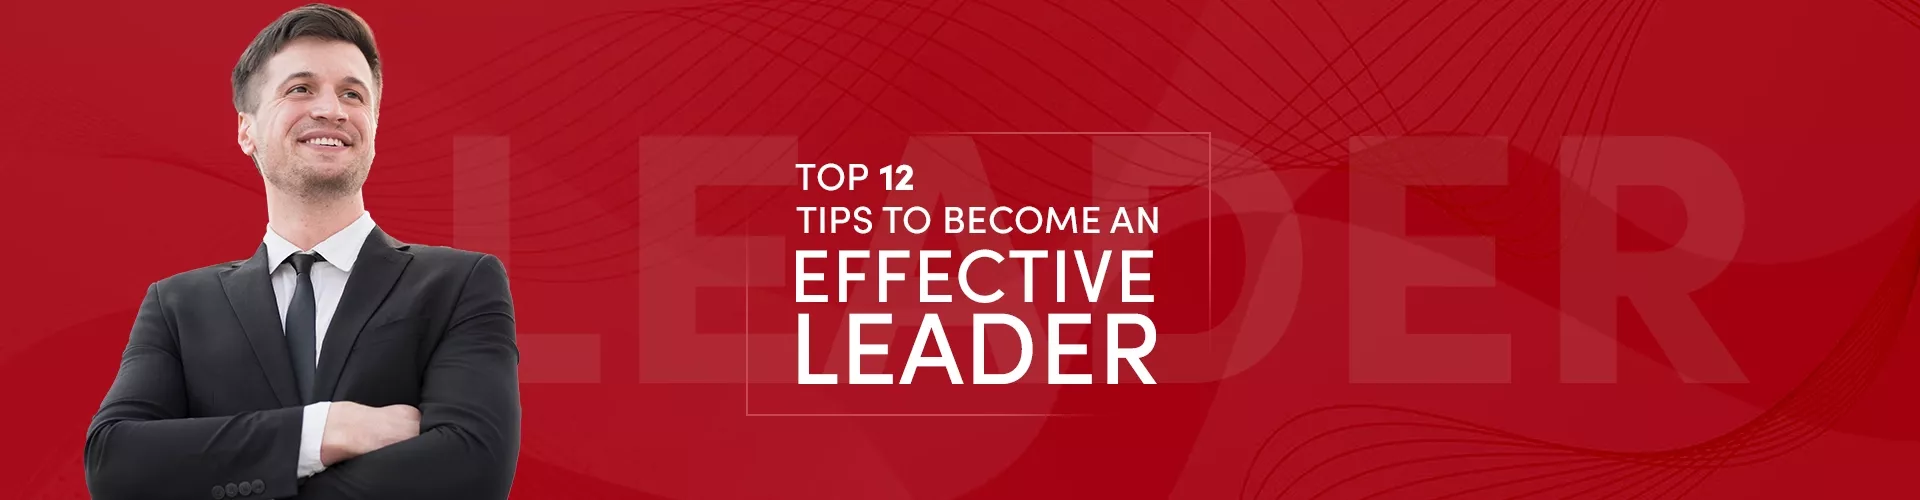 Top 12 Tips to Become an Effective Leader